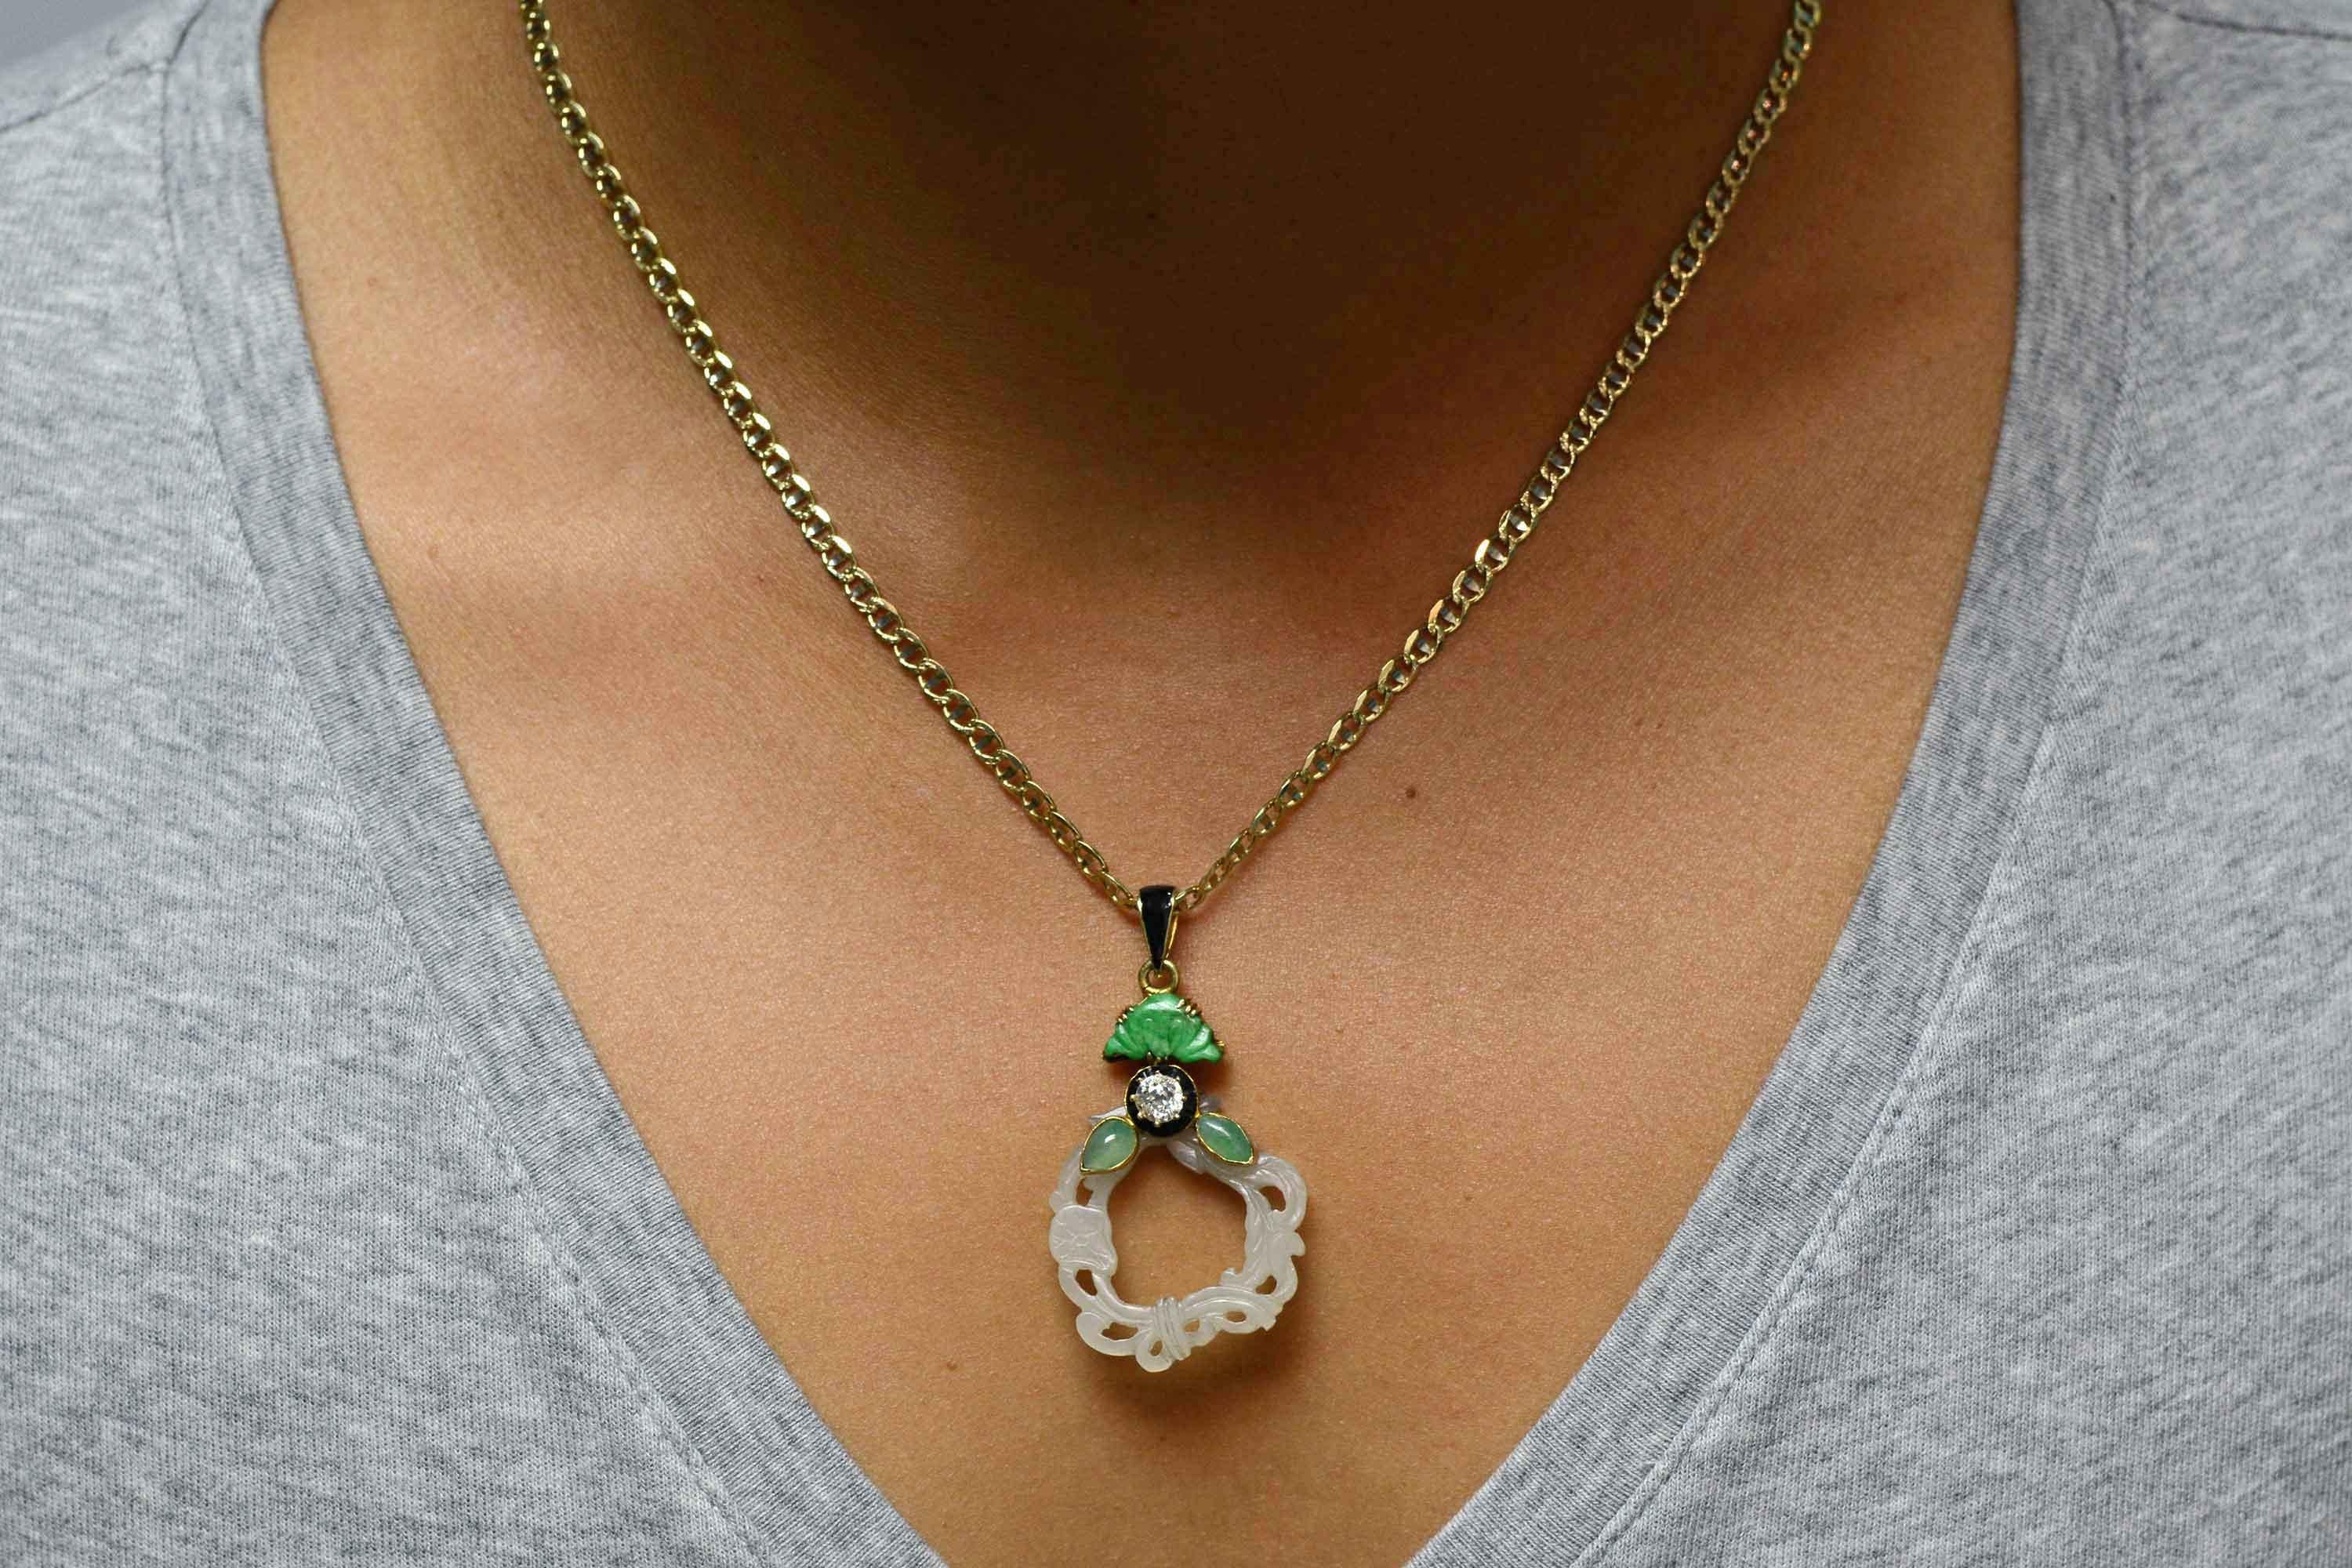 An authentic antique Arts & Crafts jade pendant with many elements that combine in a synergistic flow. The sinuous carving of the water jade is flanked by apple green pears, topped with an old mine cut 1/3 carat diamond surround by French cut black